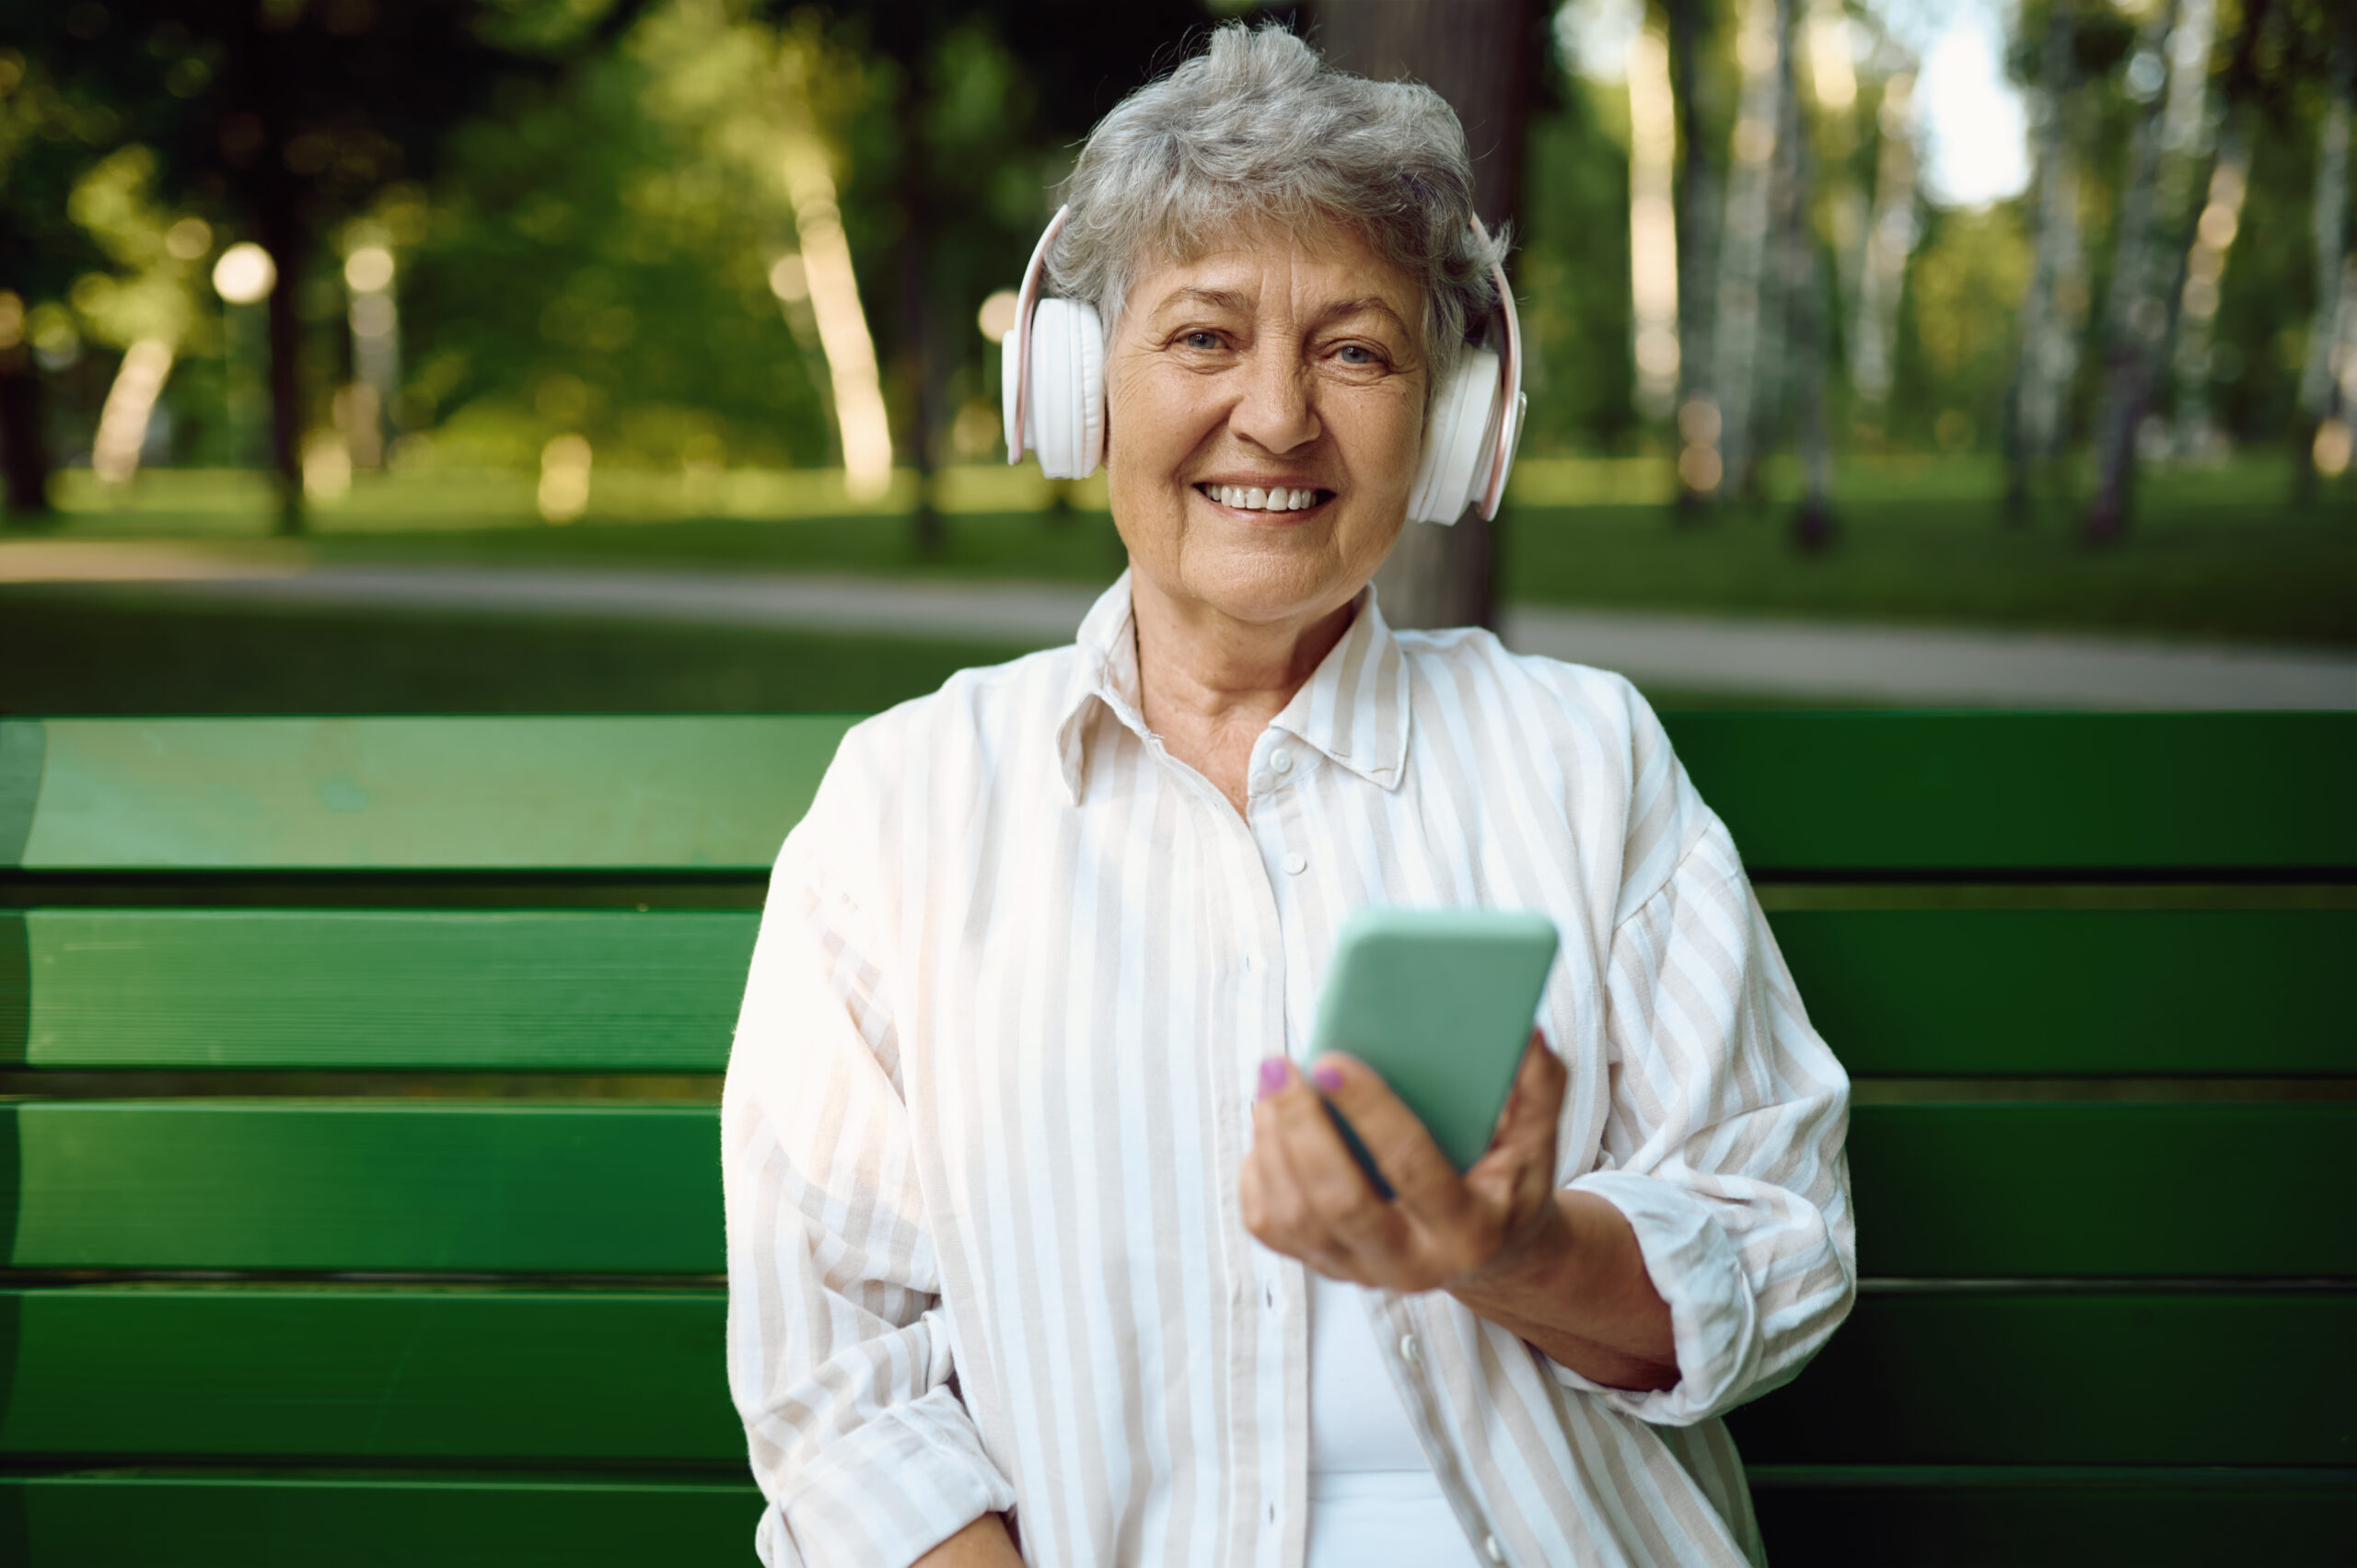 Old woman in headphones listens to music on the bench in summer park. Aged people lifestyle. Pretty grandmother having fun outdoors, an elderly female person on nature